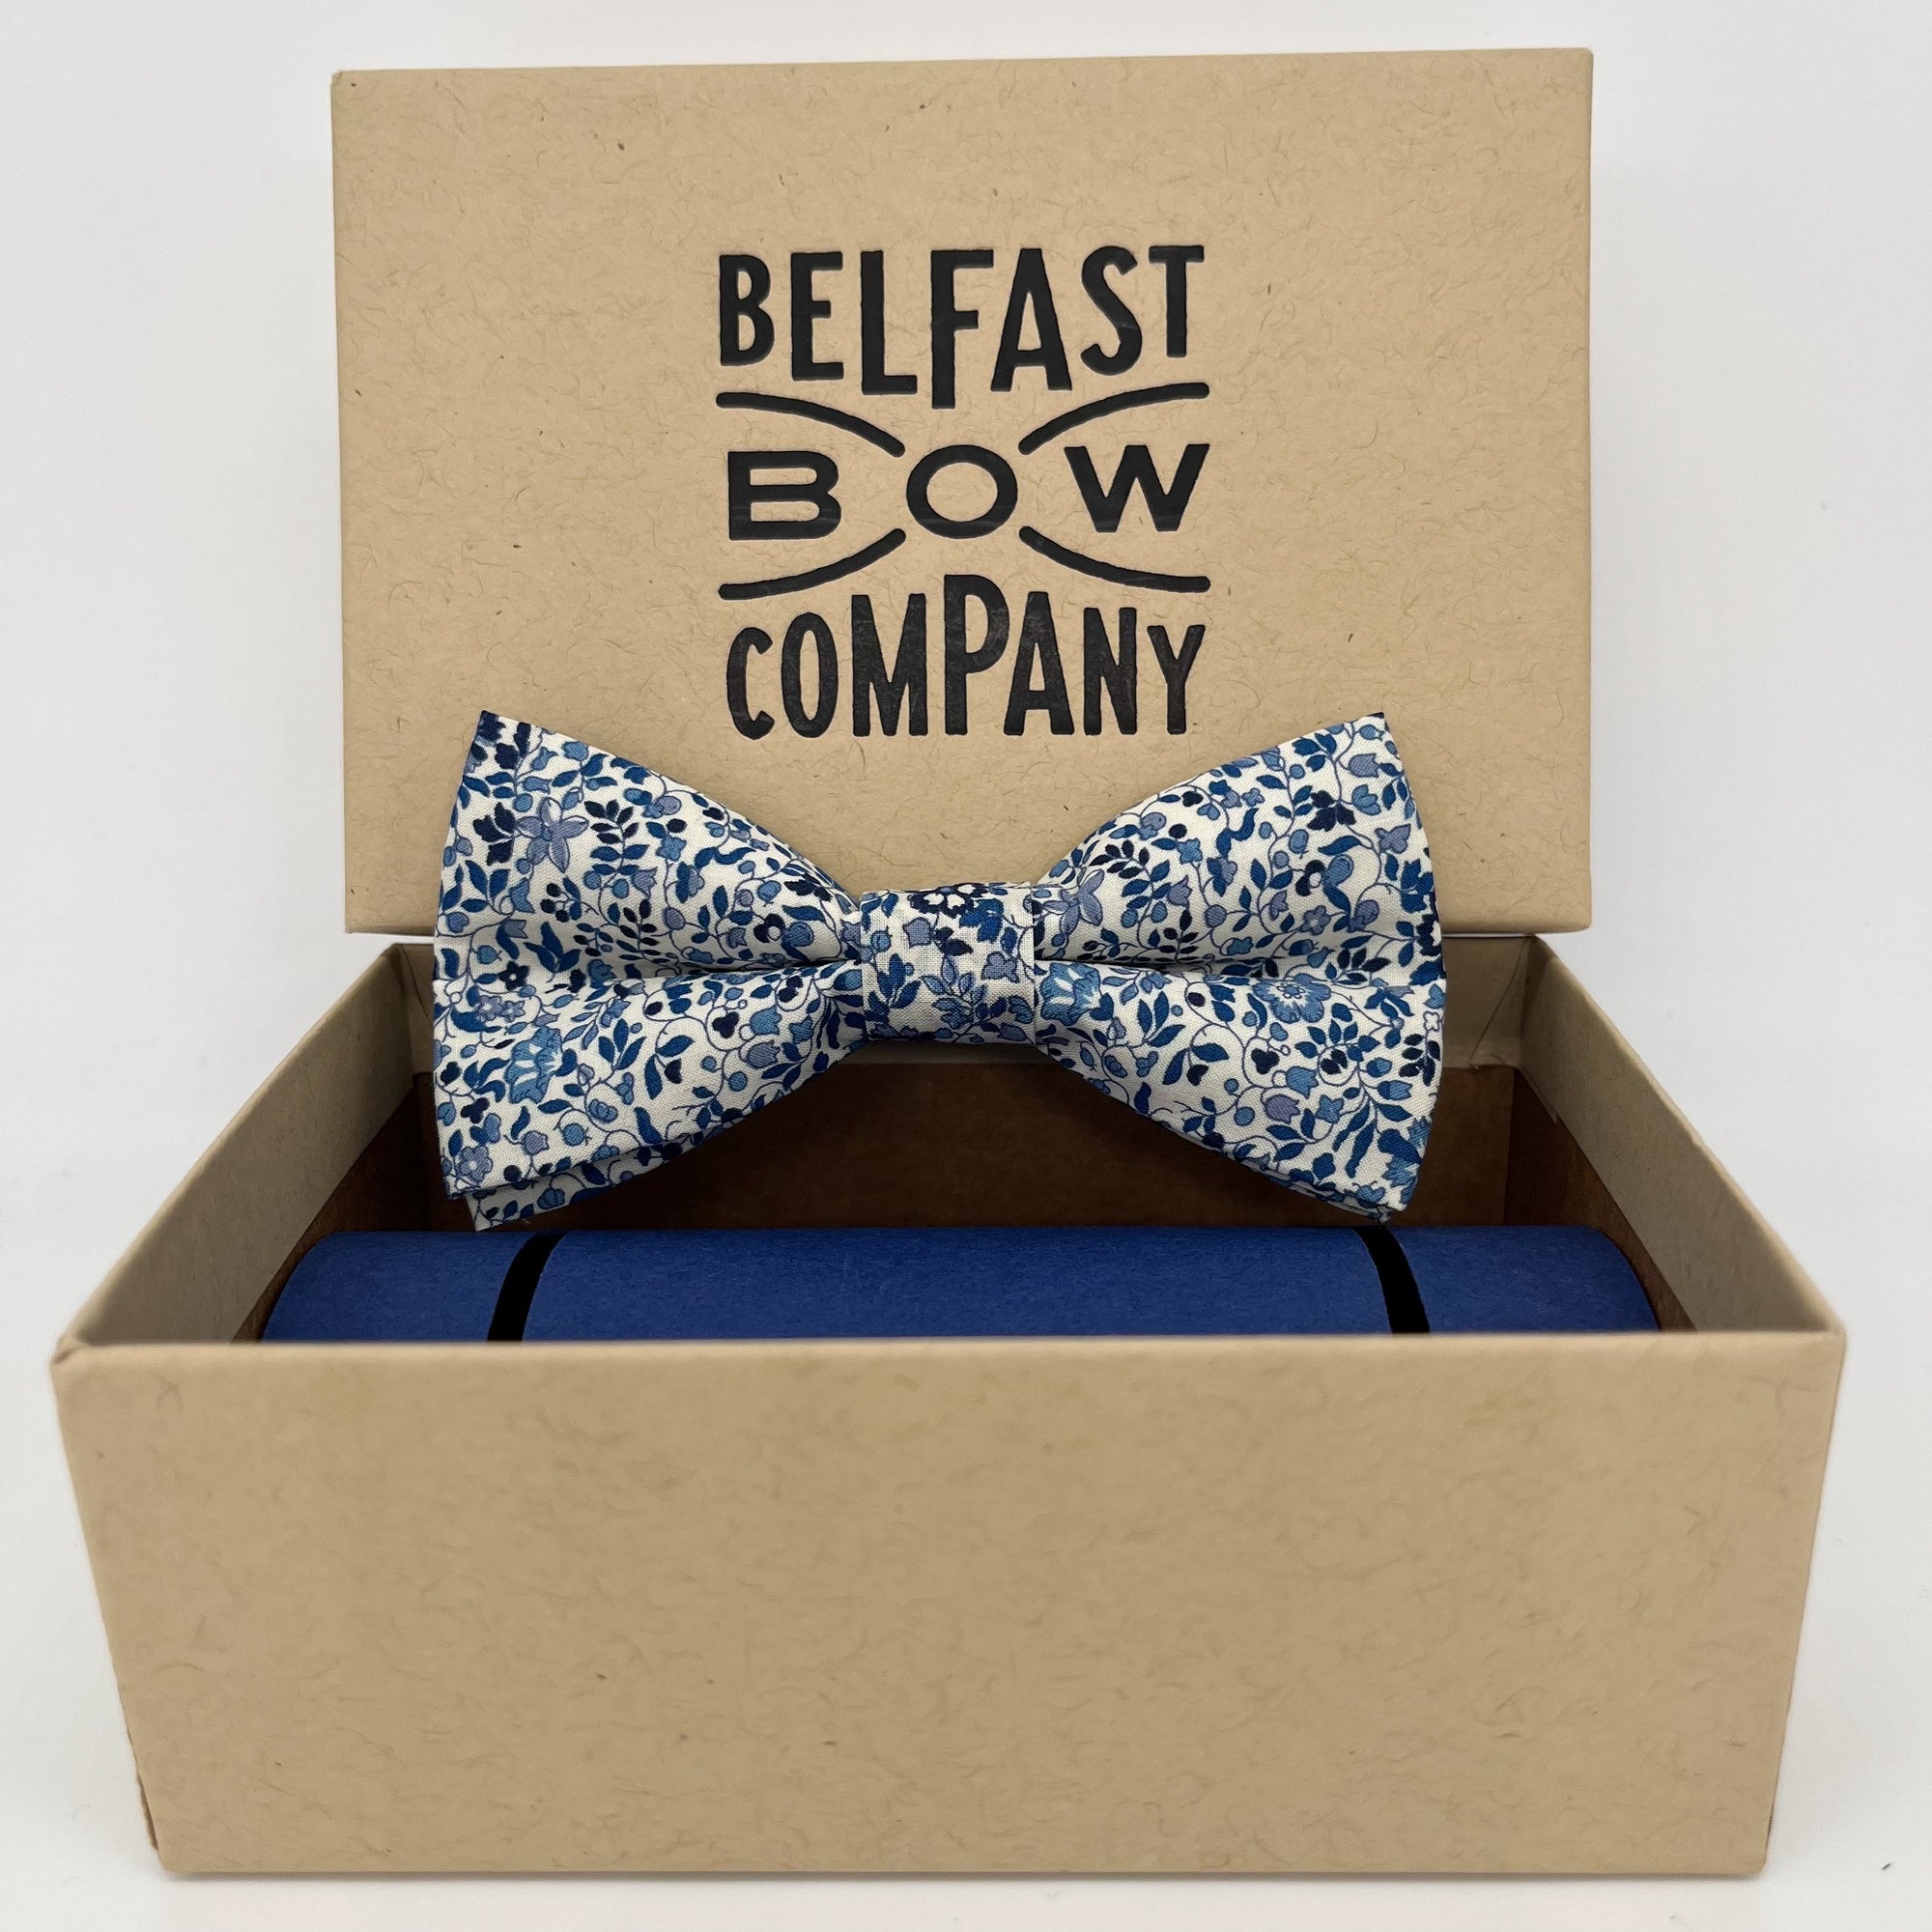 Boy liberty of london bow tie in navy blue floral by the belfast bow company